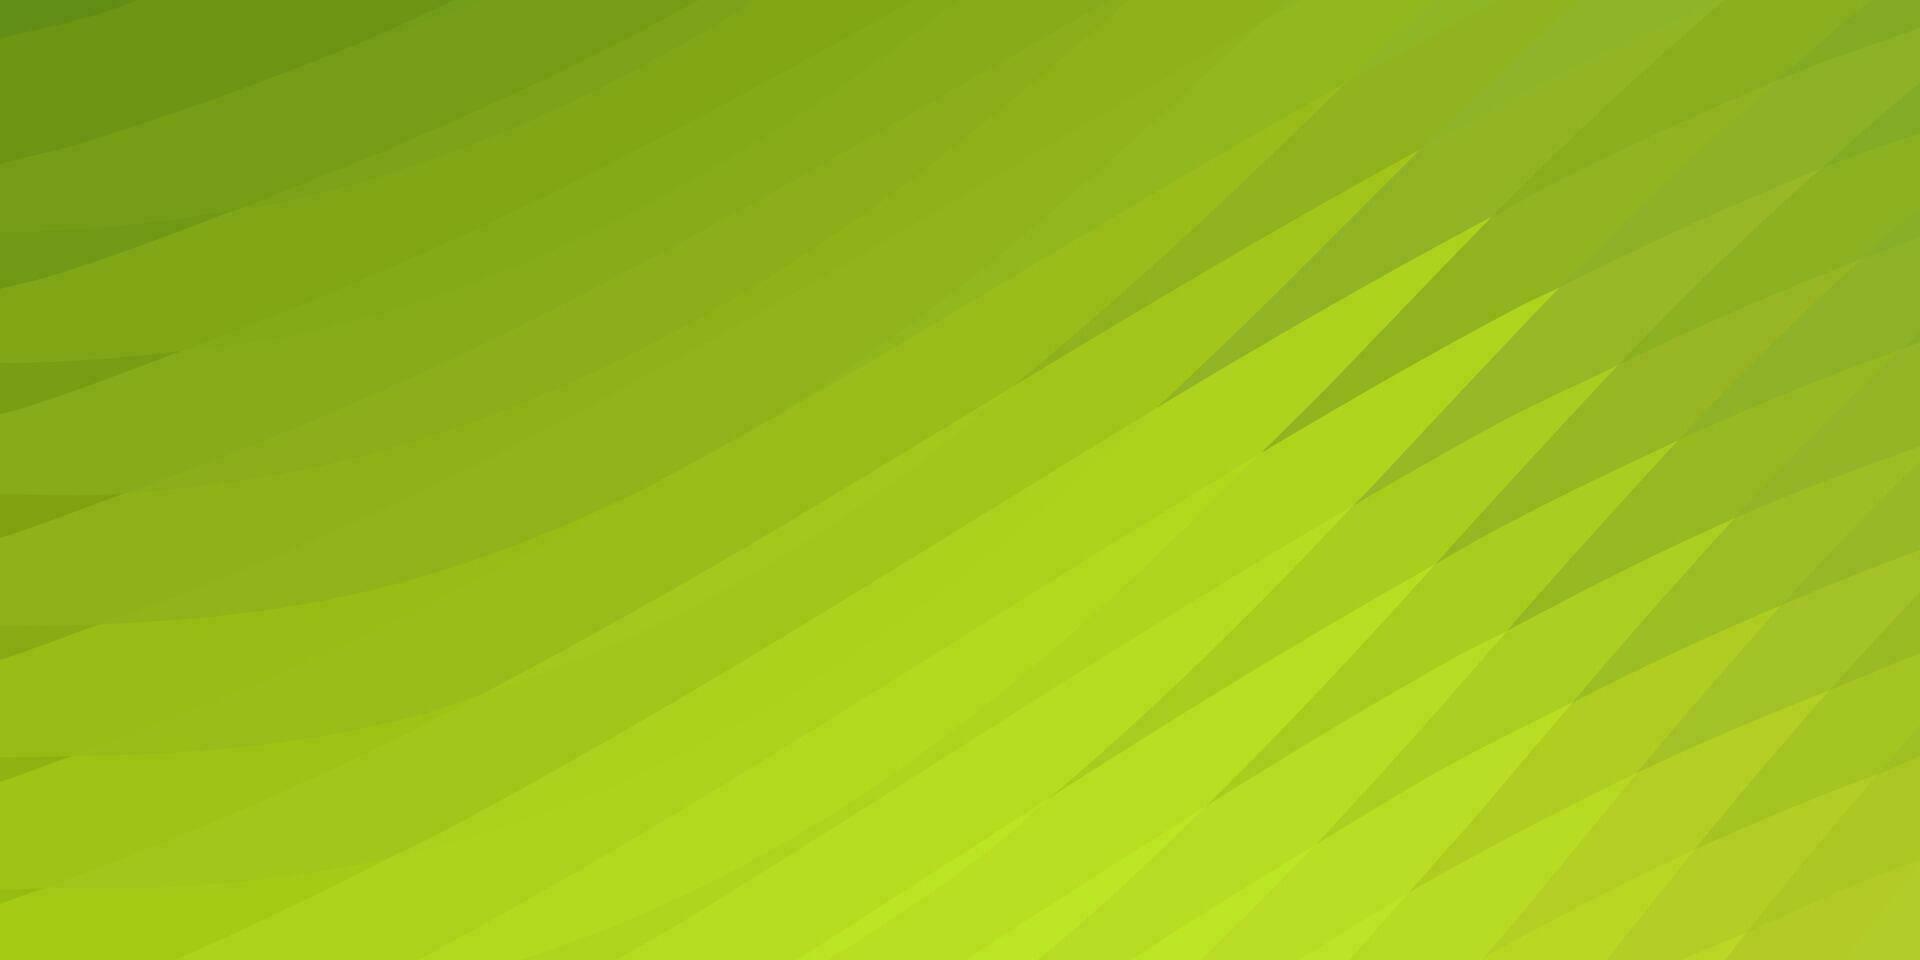 abstract green yellow modern elegant background vector